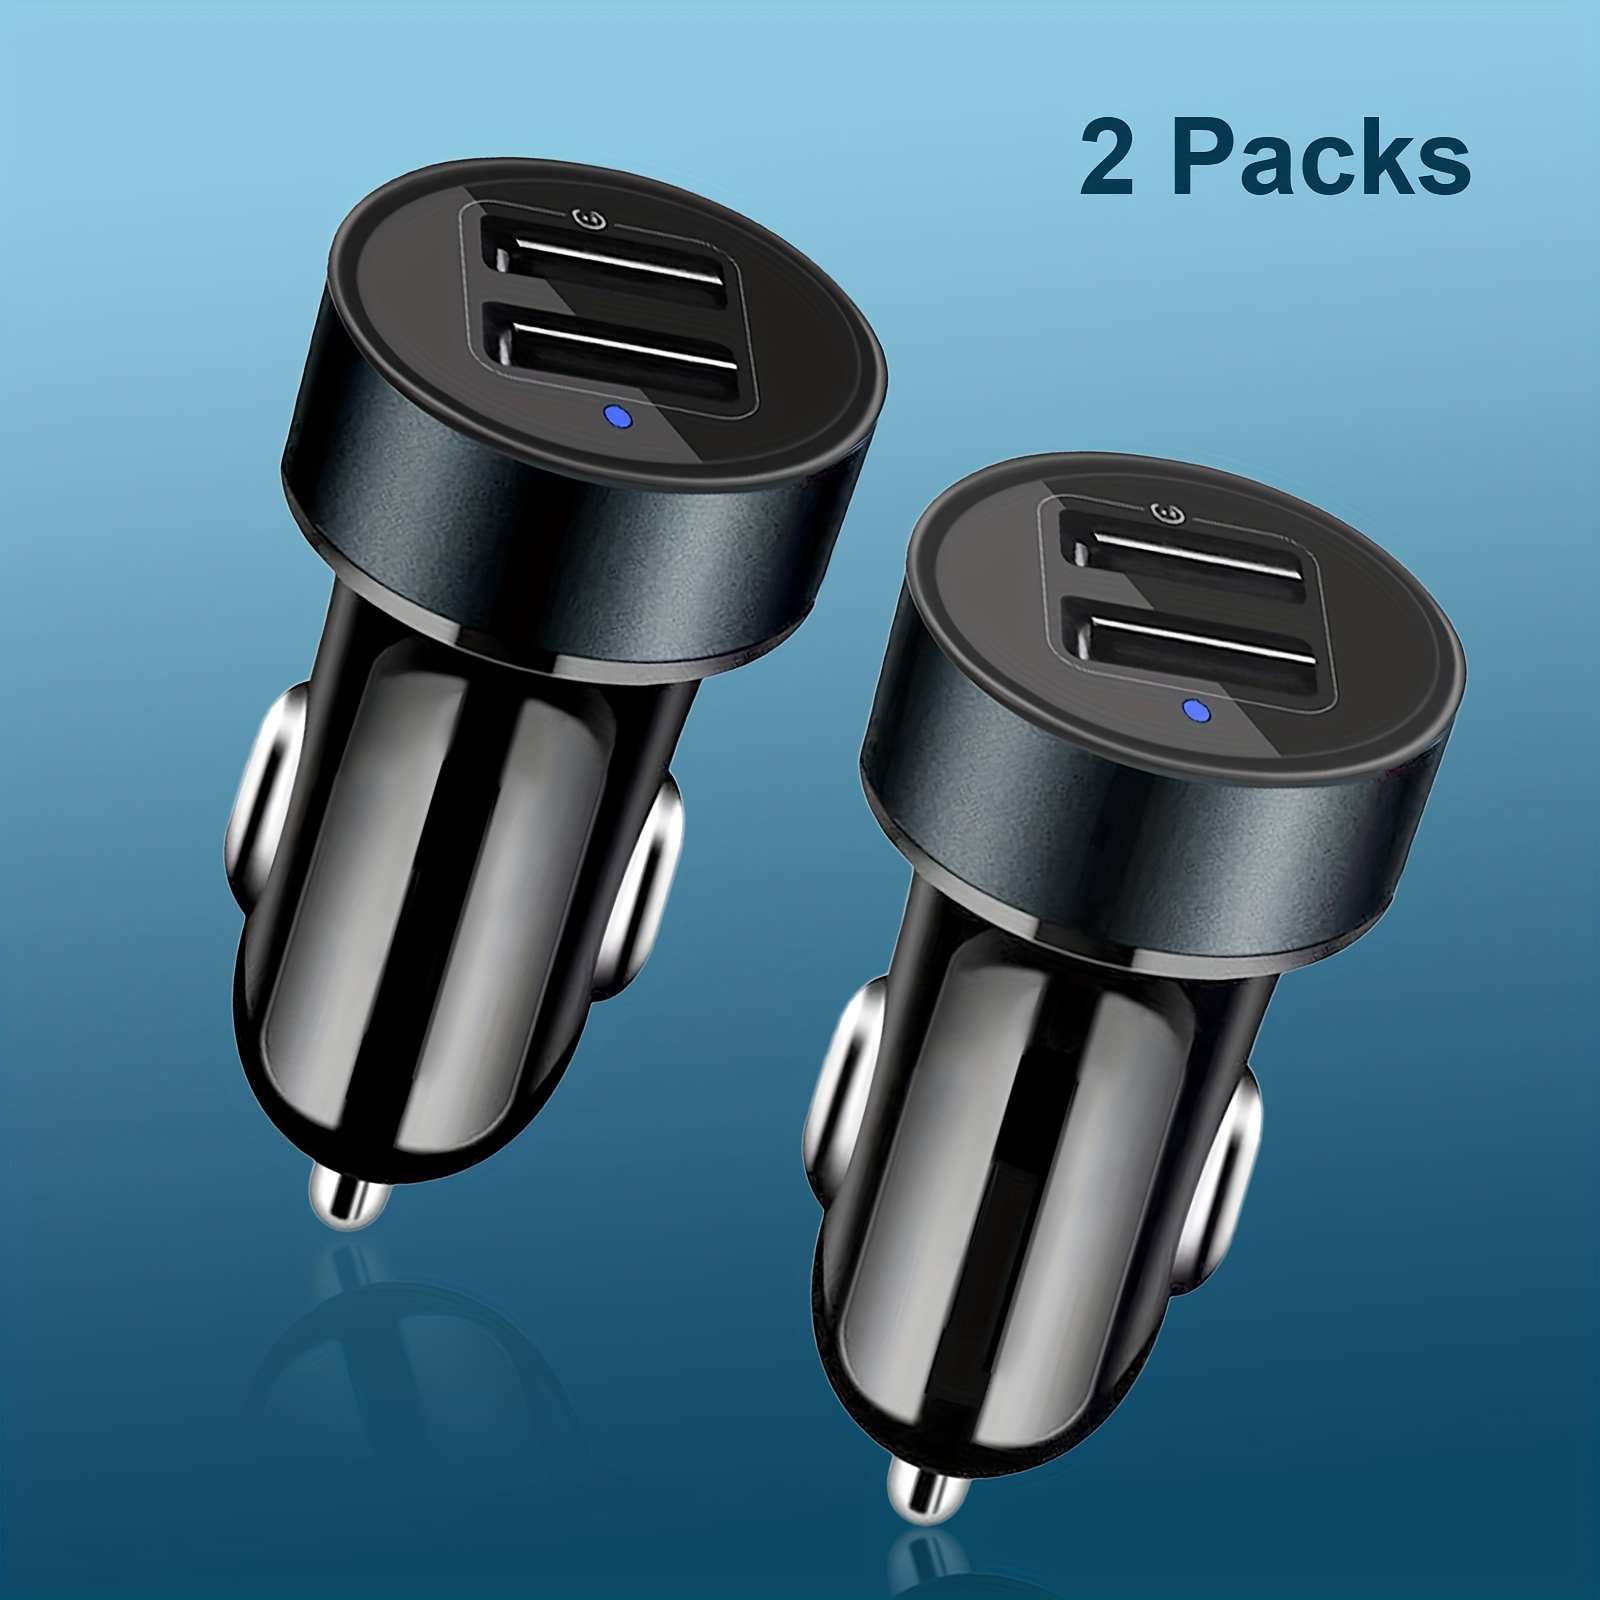  4.8A Dual USB Car Charger Socket 12V 24V USB Power Outlet  Adapter Replacement Phone Charger for ATV Bus Boat RV Vehicle : Cell Phones  & Accessories